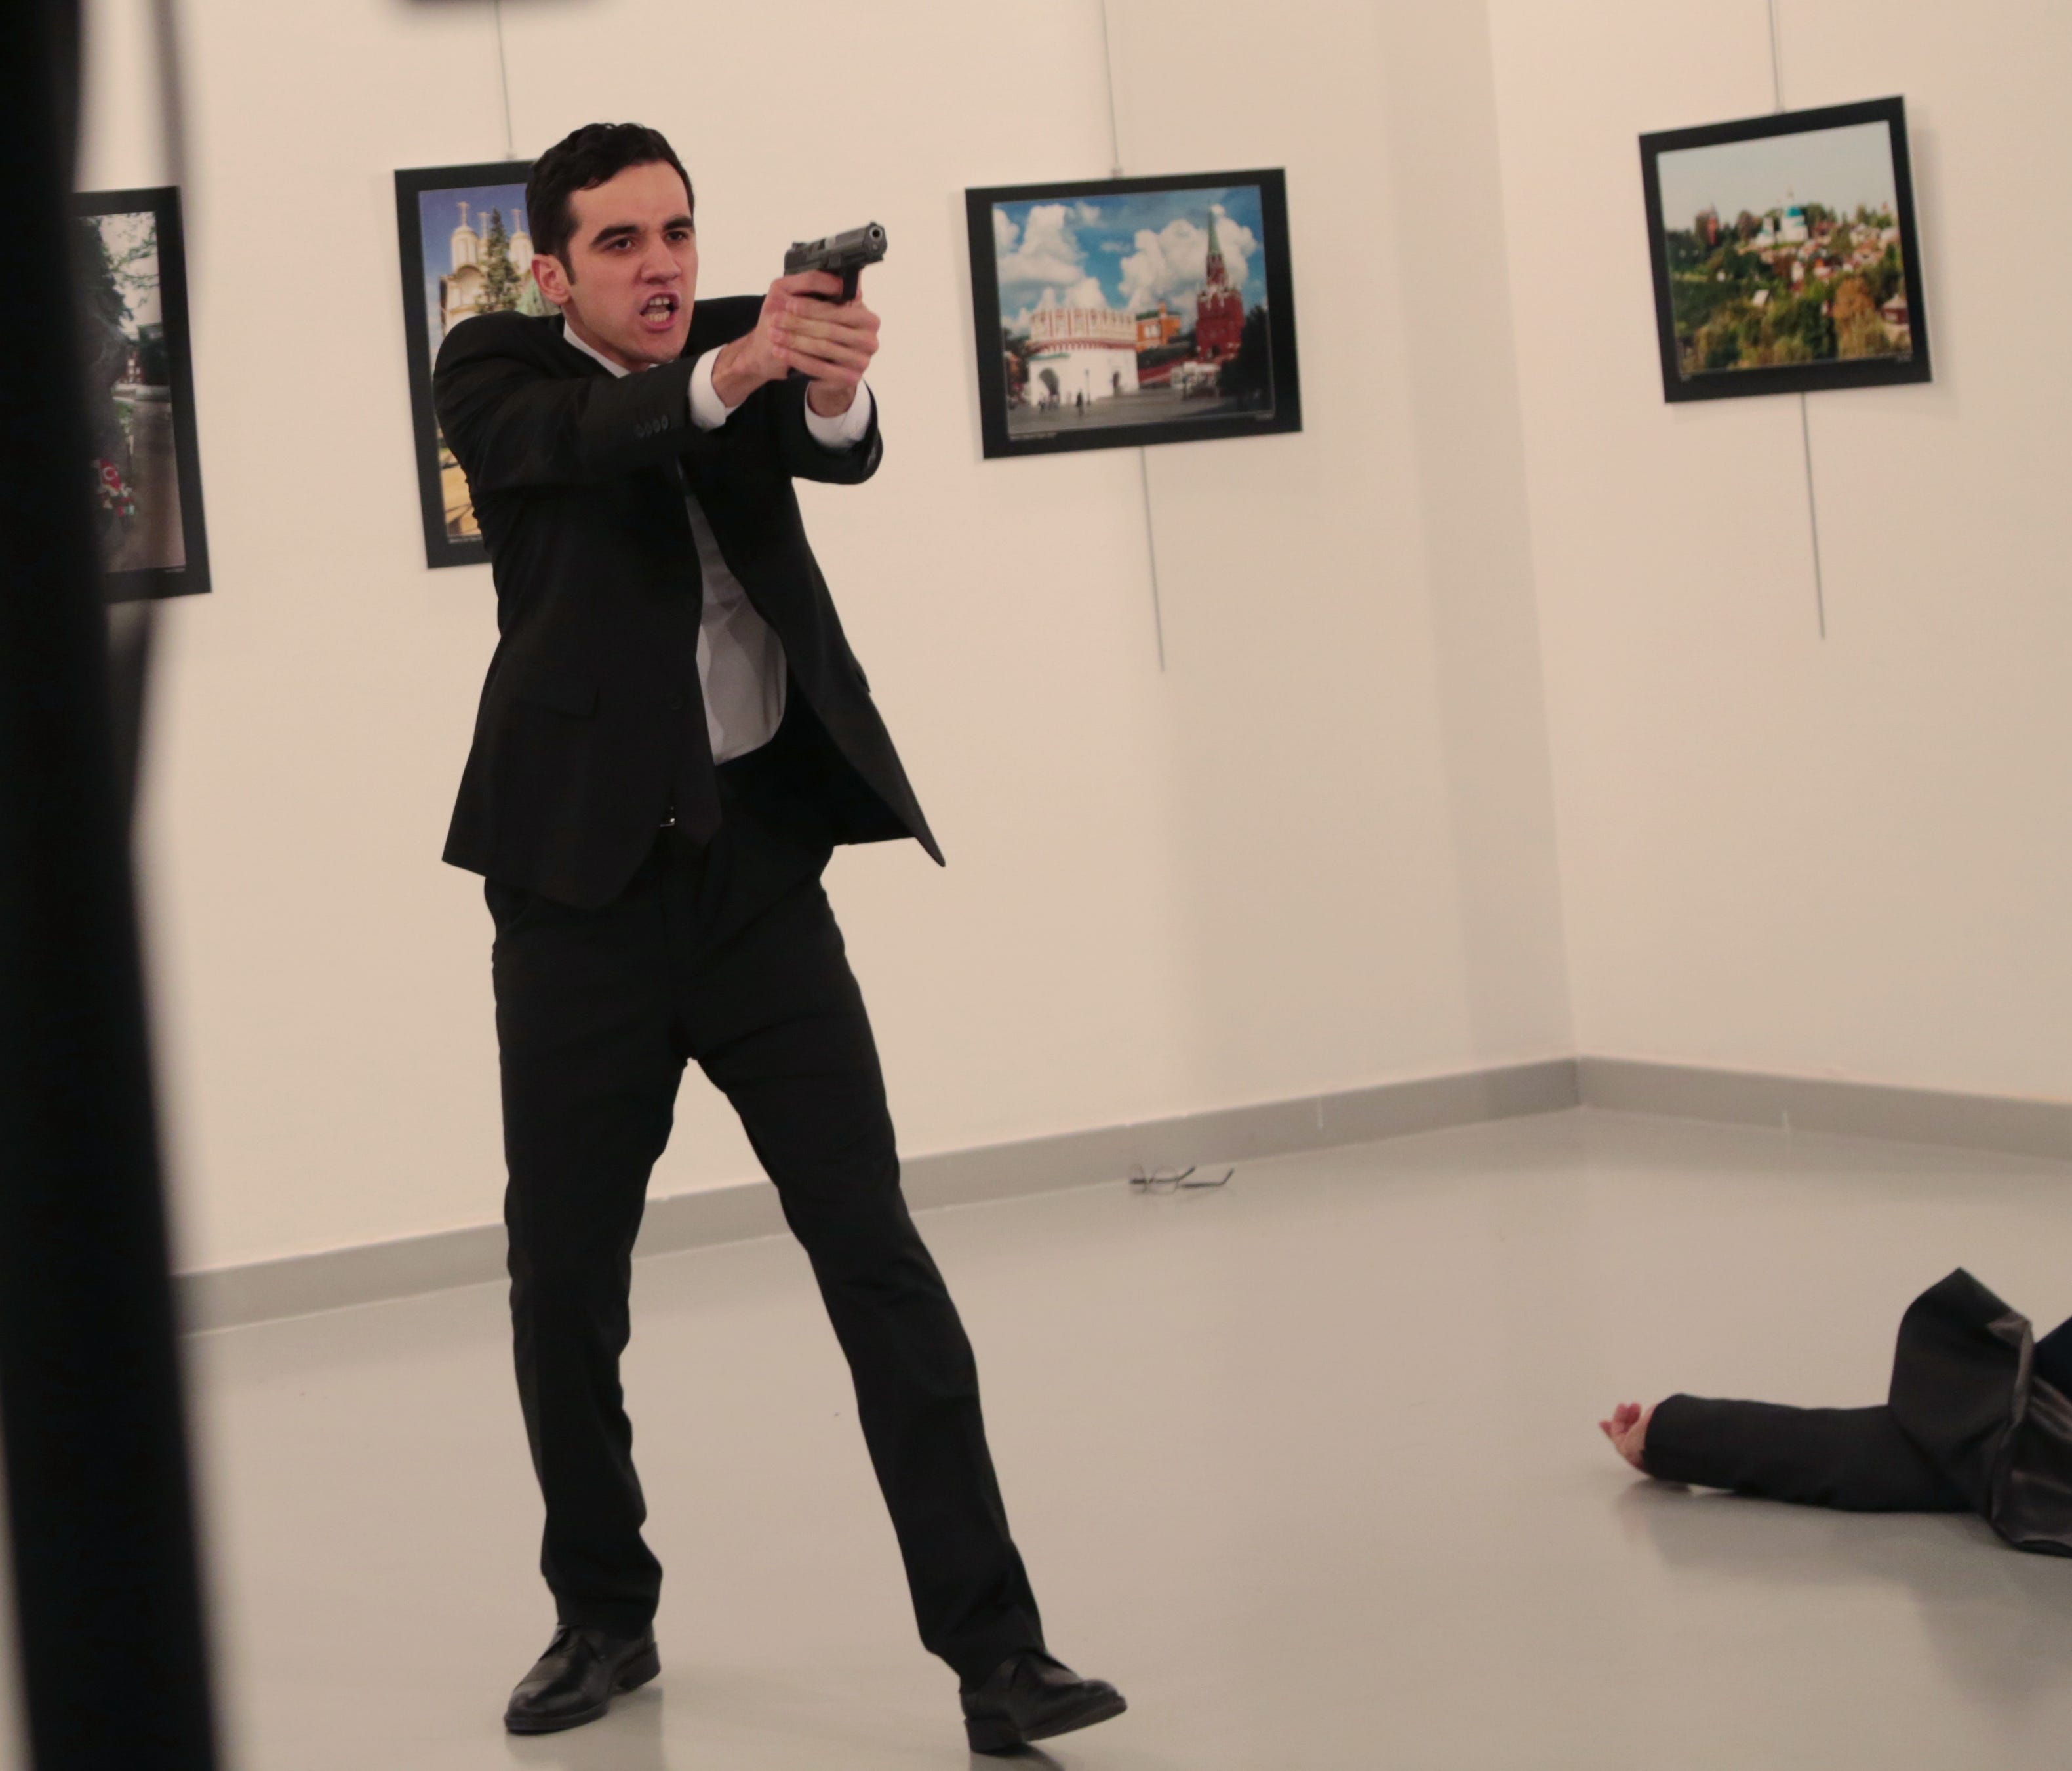 An unnamed gunman gestures after shooting the Russian Ambassador to Turkey, Andrei Karlov, at a photo gallery in Ankara, Turkey, Monday, Dec. 19, 2016. The Russian foreign ministry spokeswoman said he was hospitalized with a gunshot wound.